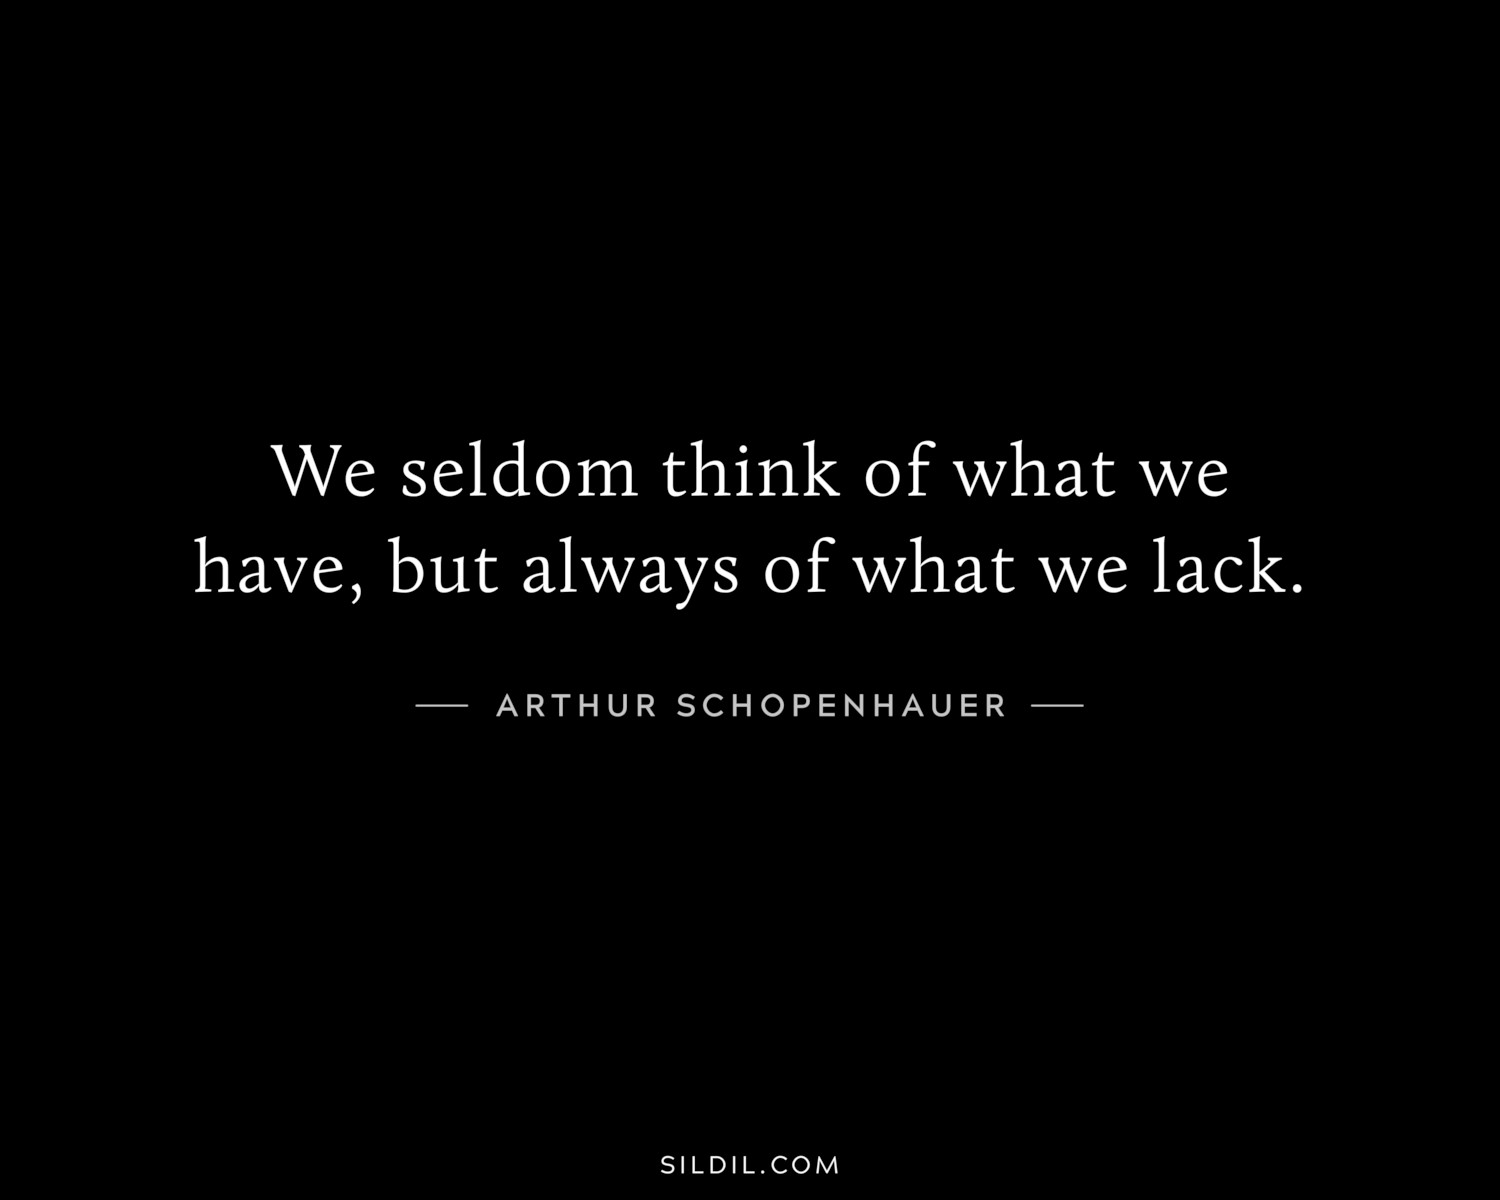 We seldom think of what we have, but always of what we lack.